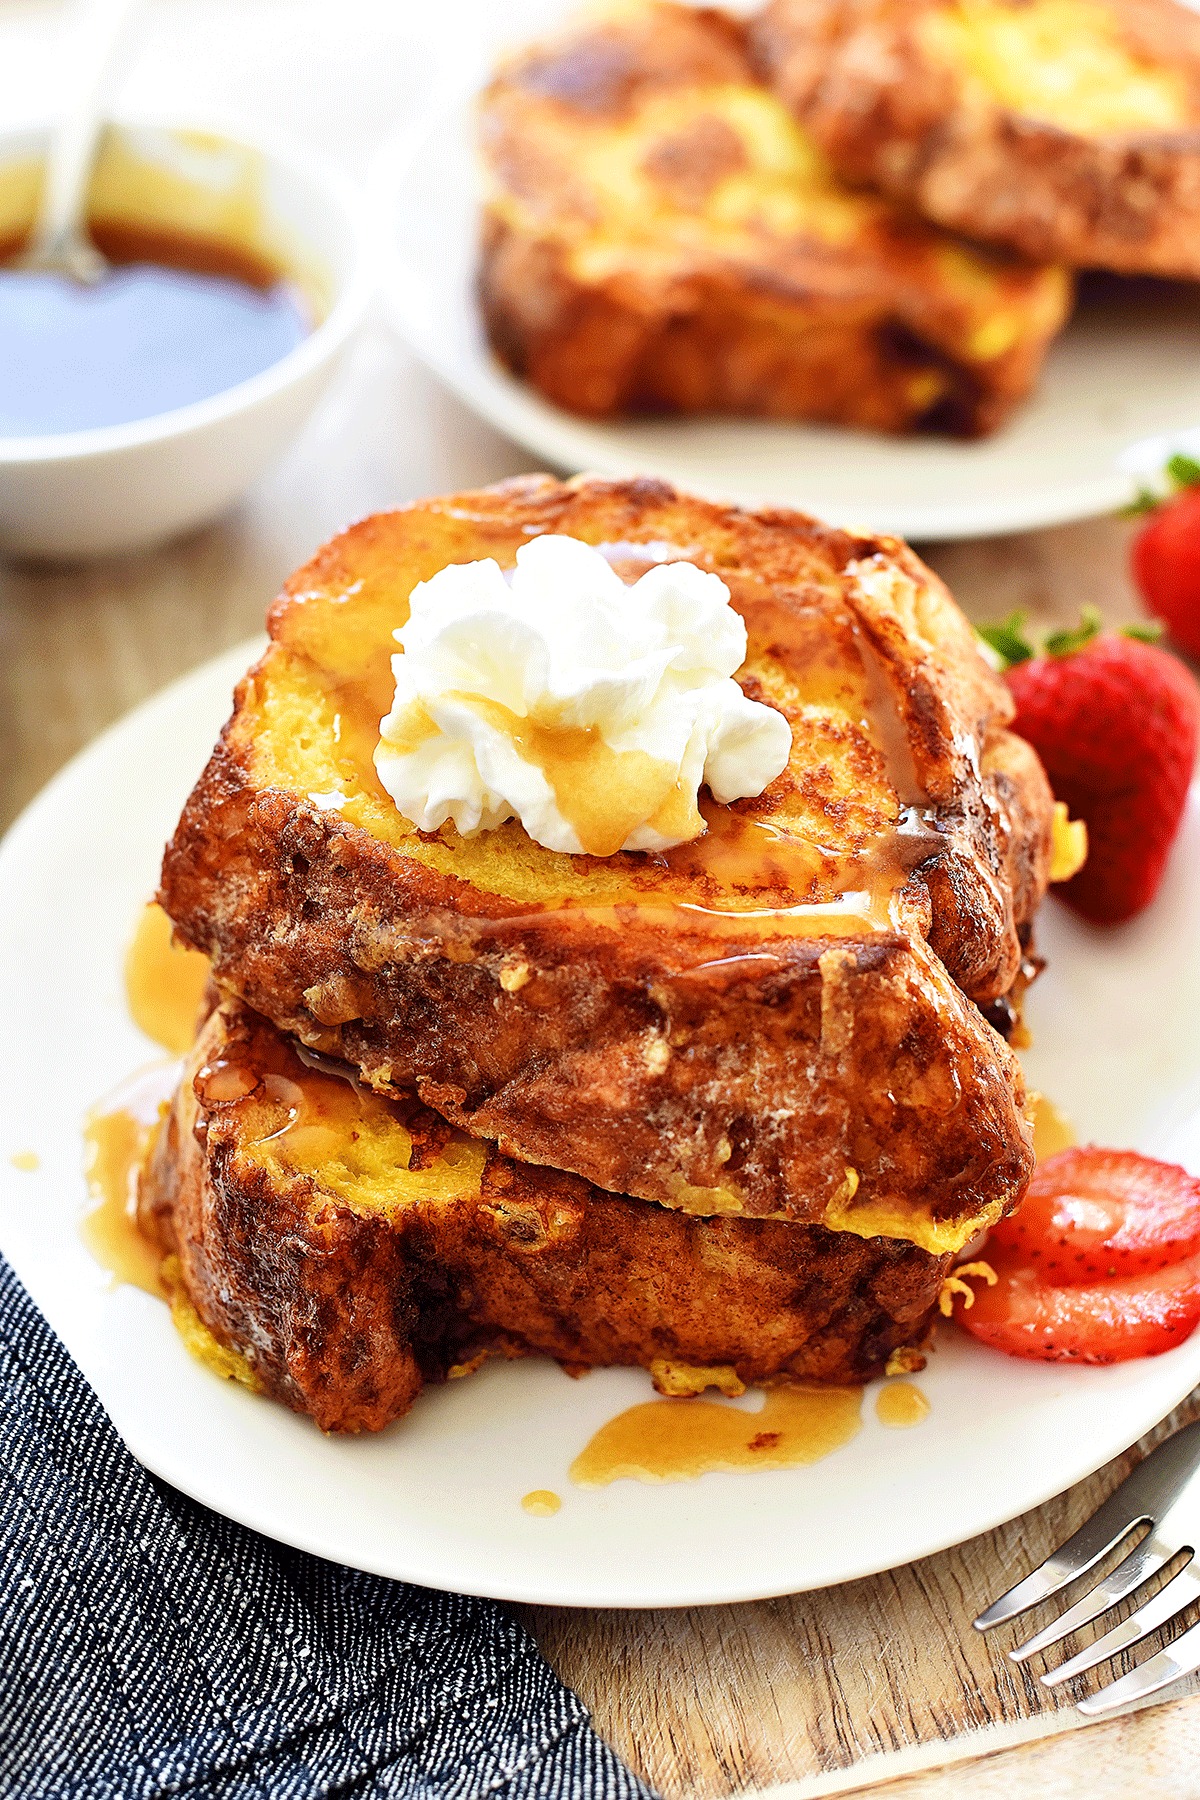 Kneader's Copycat Chunky Cinnamon French Toast is delicious french toast served with a homemade caramel syrup. Life-in-the-Lofthouse.com